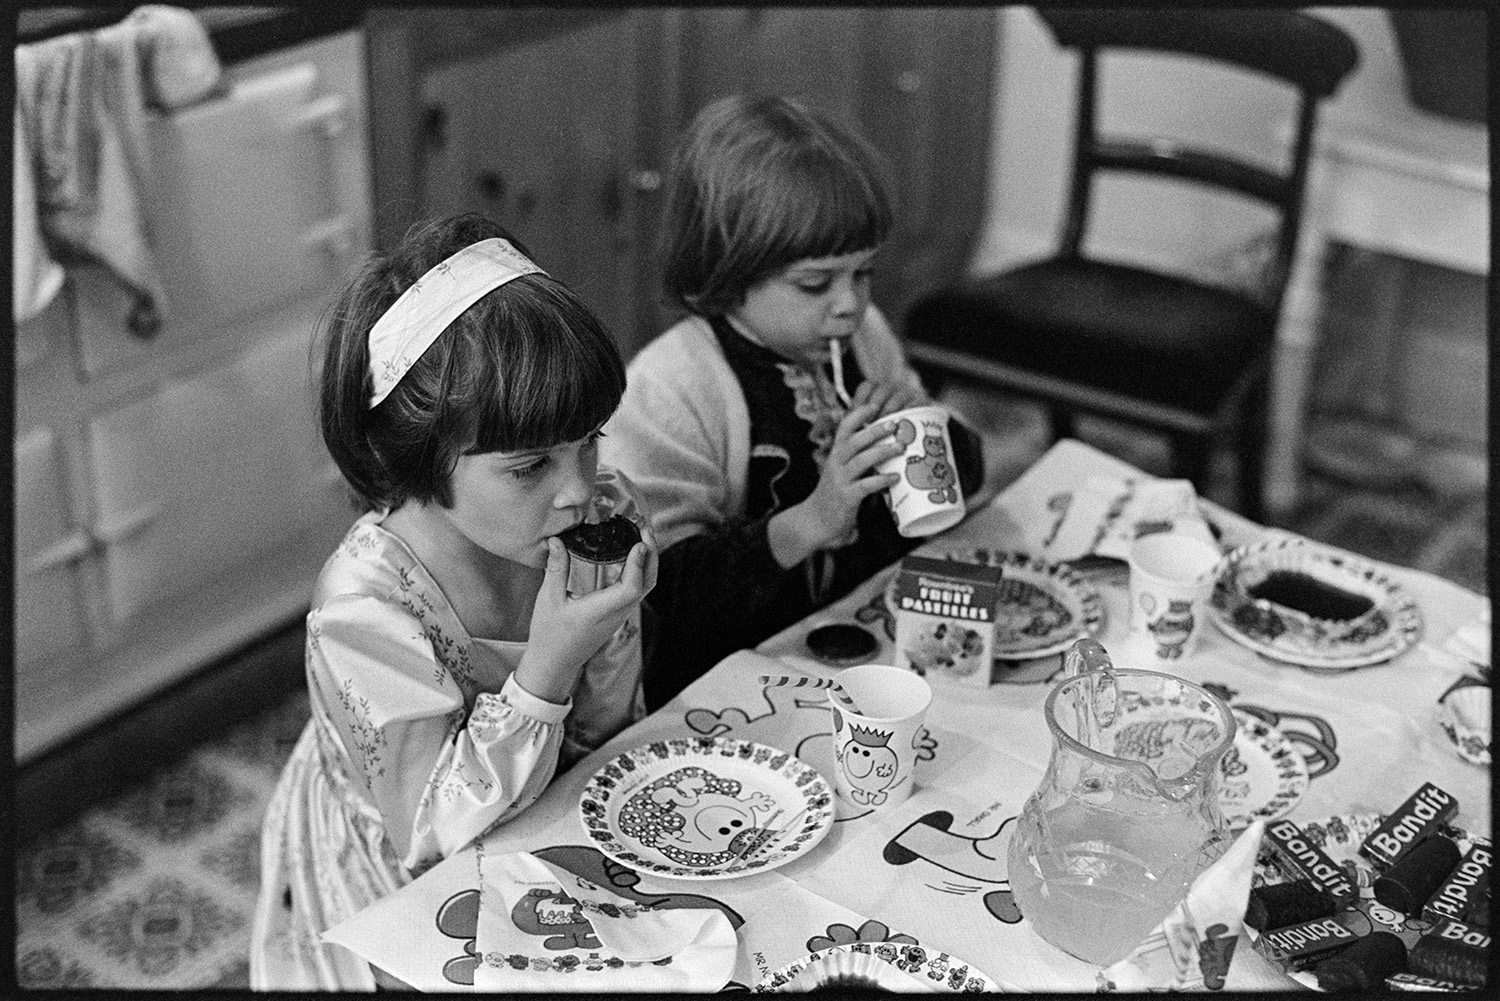 Birthday tea party, wonderful spread with cakes and children stuffing themselves, eating. 
[Two children sat at a table eating and drinking at the 6th birthday of Hilary and Roger Hill's child, at Marwood House.  The table is laid with Mr Men themed plates and table cloth. A jug of juice and chocolates can also be seen on the table.]